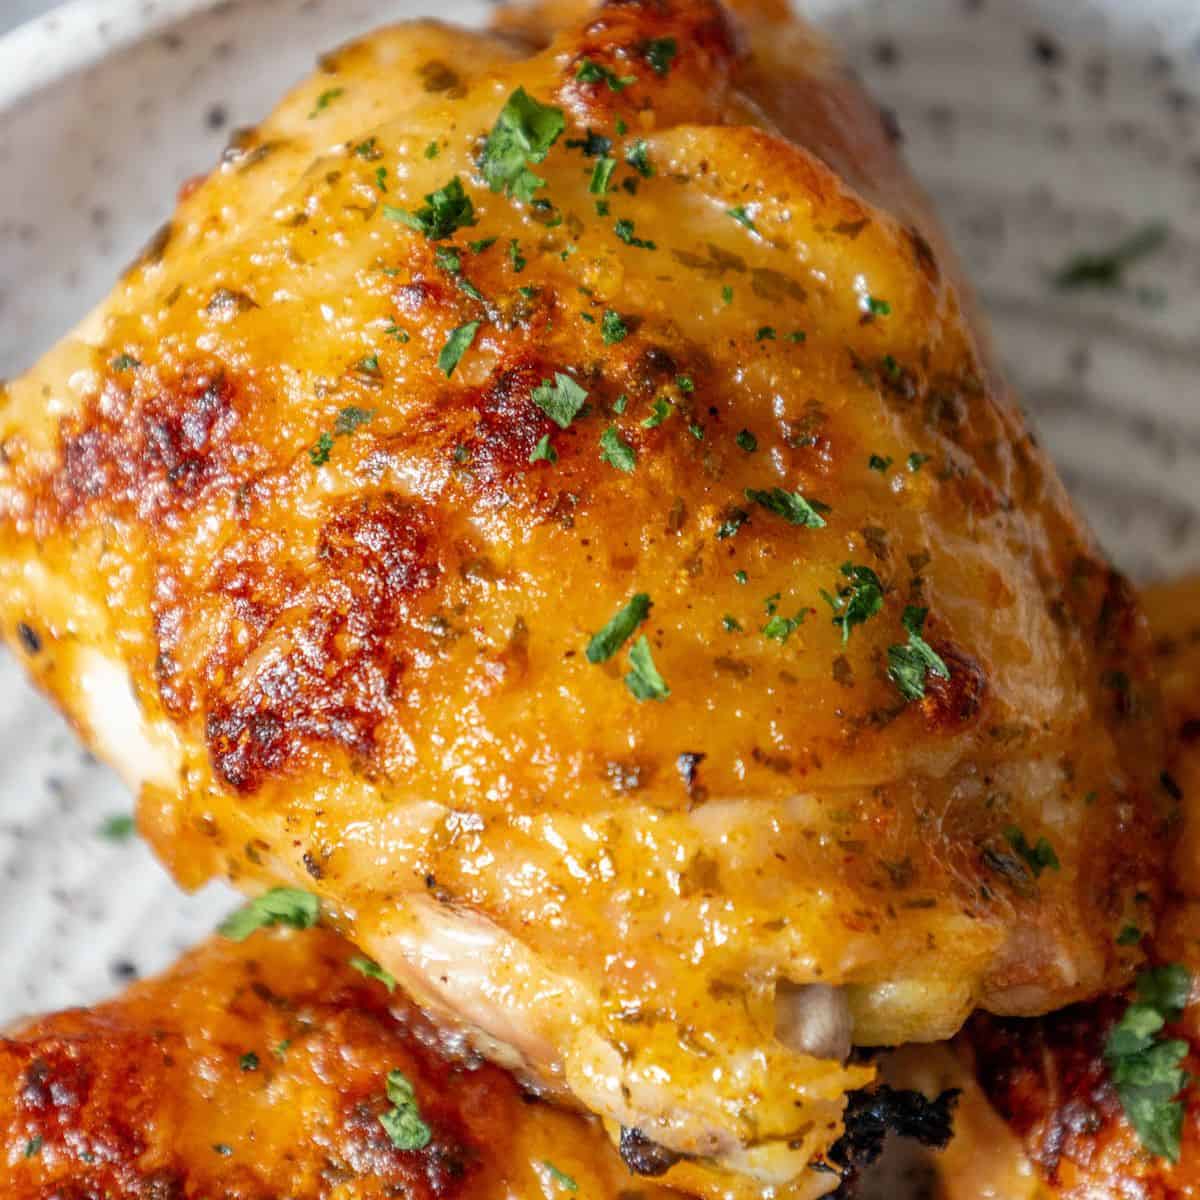 https://sweetcsdesigns.com/wp-content/uploads/2021/04/baked-ranch-chicken-thighs-recipe-picture.jpg